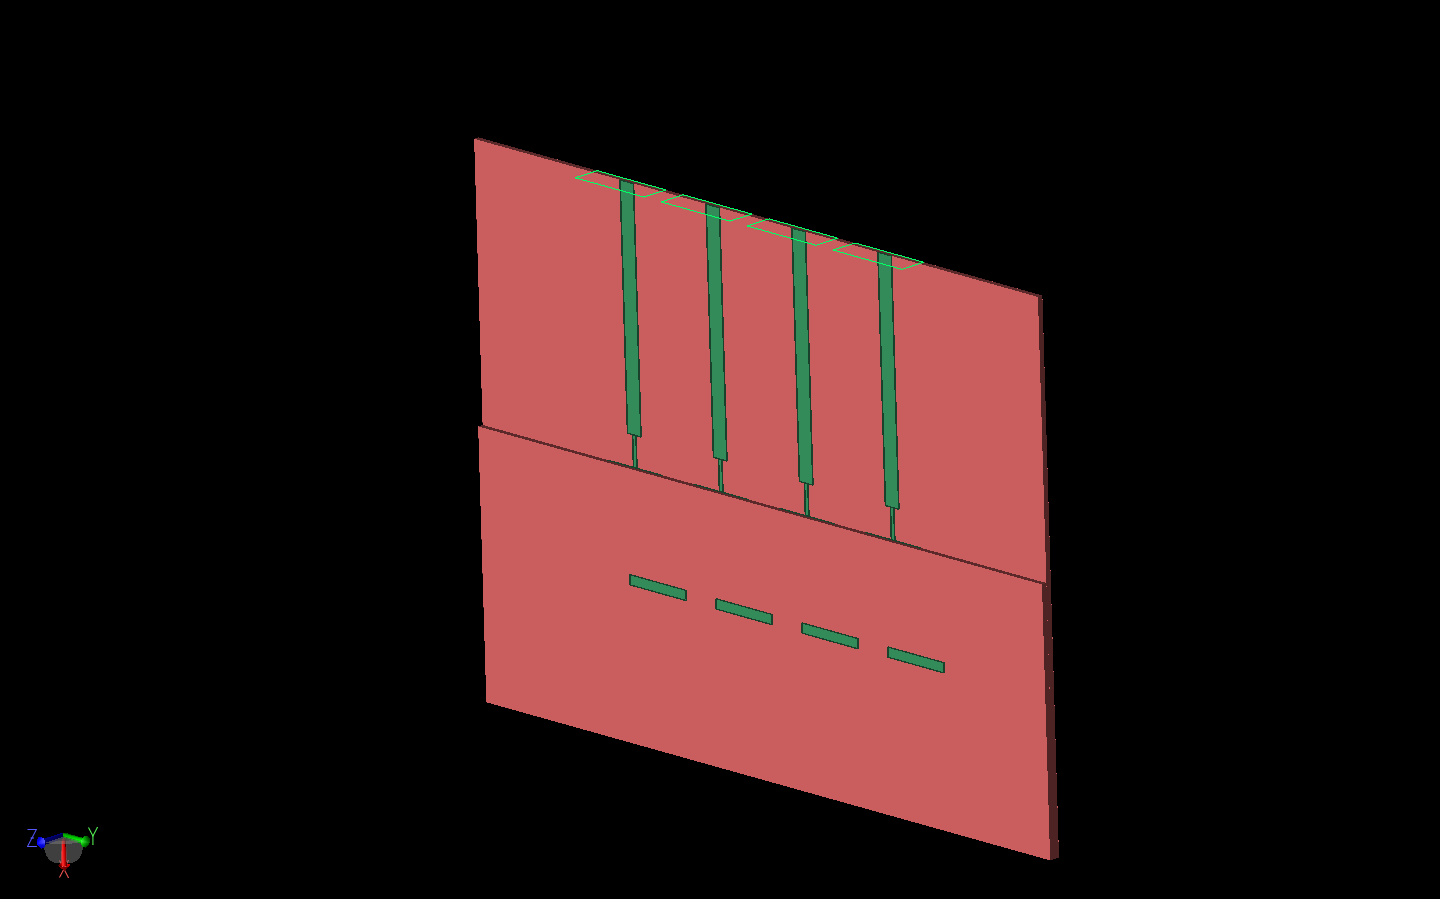 Figure 2: The antenna array is shown in three dimensions with the edge of the top substrate layer more visible over the patches. The four nodal waveguide feed ports are visible on the top of the array.